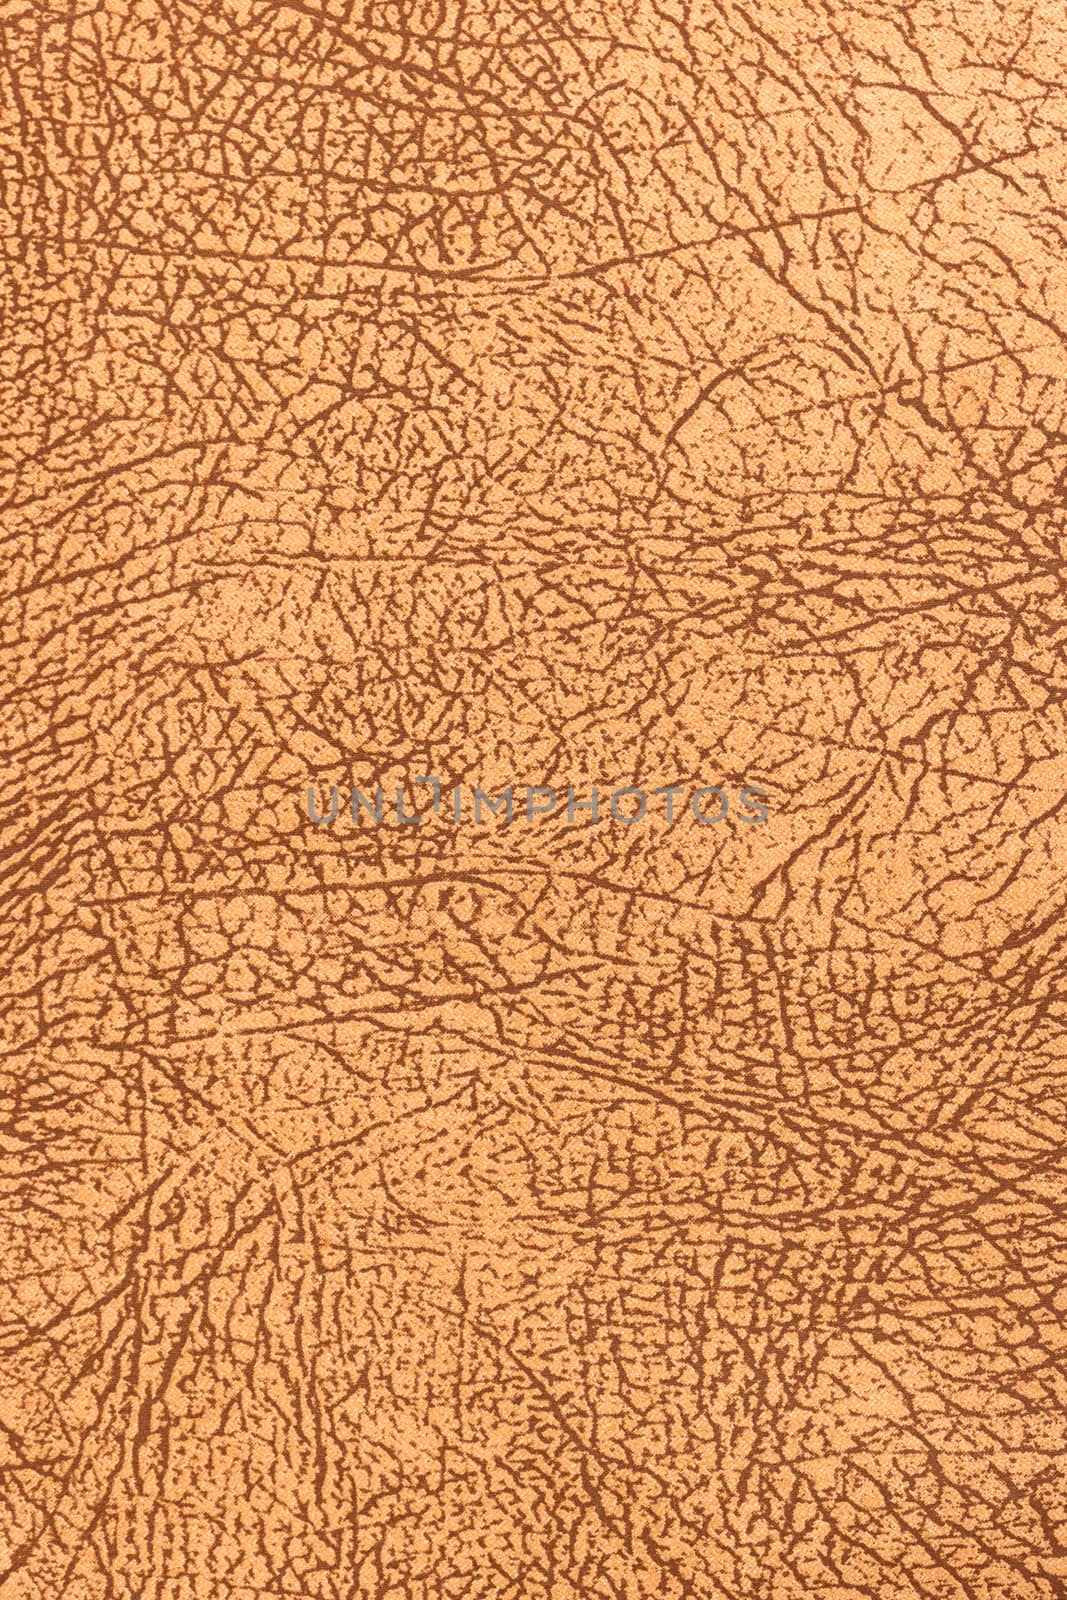 Textured background. Closeup abstract canvas fabric texture